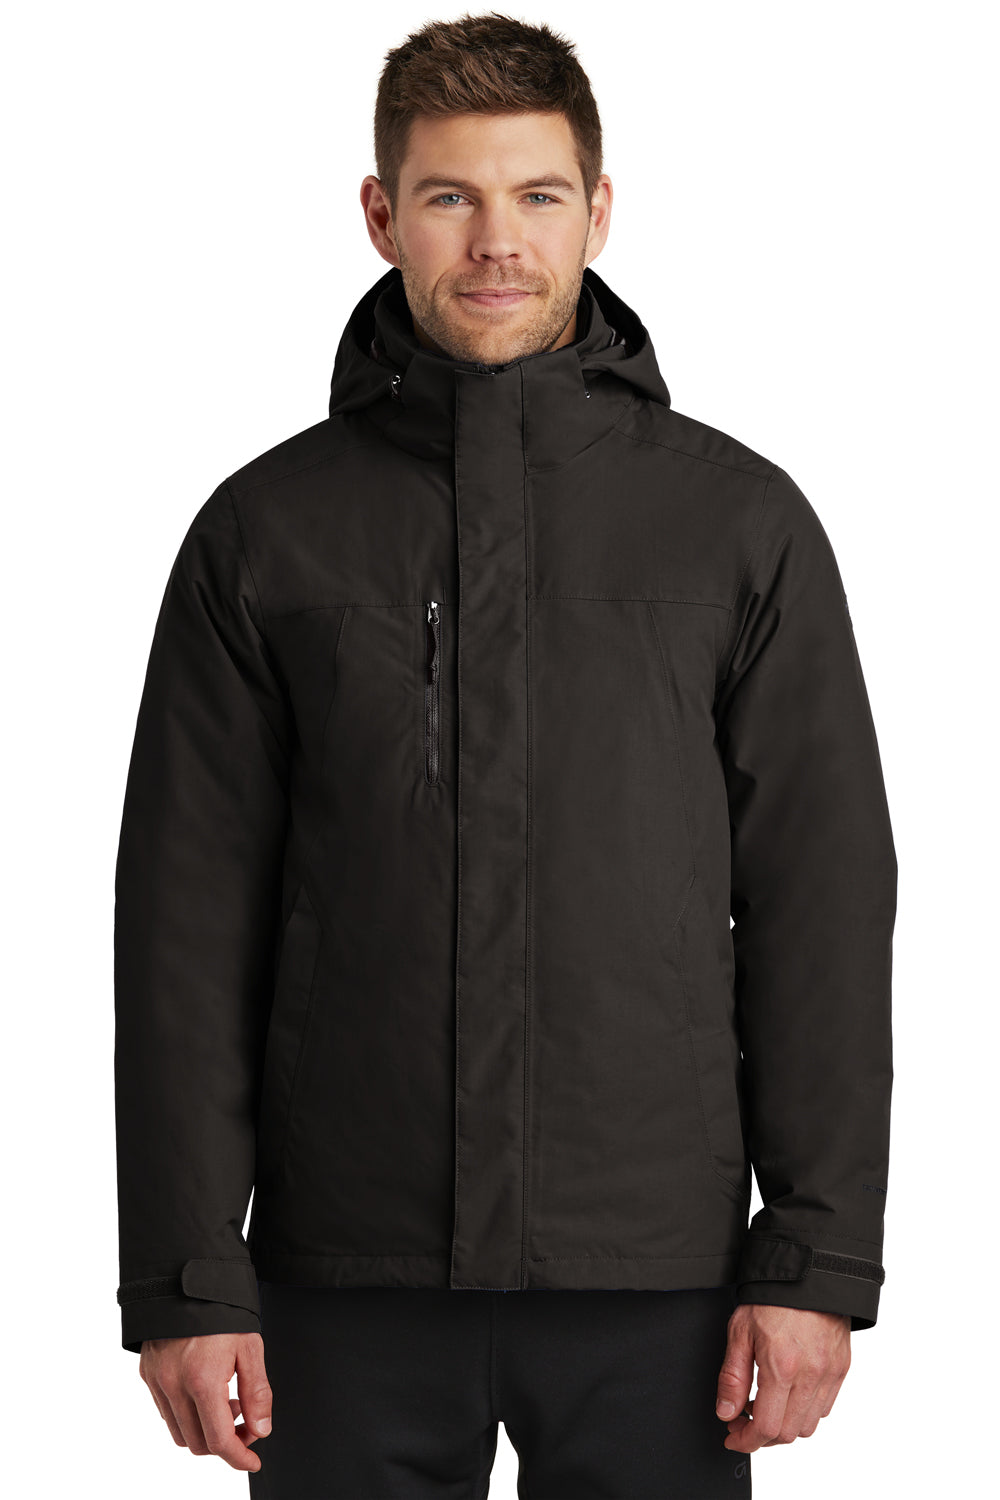 The North Face NF0A3VHR Mens Traverse Triclimate 3-in-1 Waterproof Full Zip Hooded Jacket Black Front